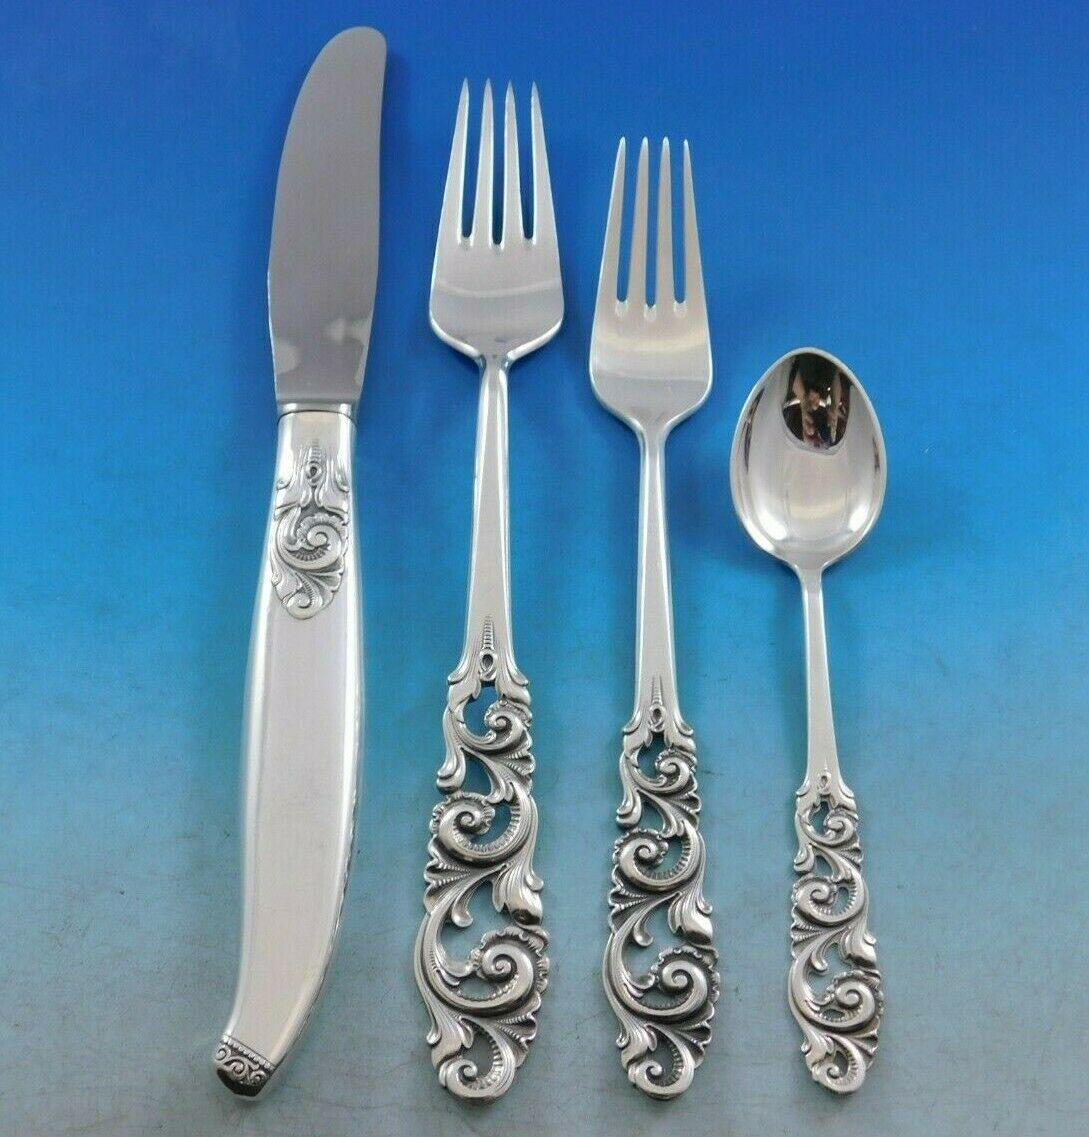 Monumental Tele by Mylius Brodrene 830 silver Norwegian flatware set, 97 pieces. This rare set features pierced handles and includes:

12 Dinner knives, 8 3/4